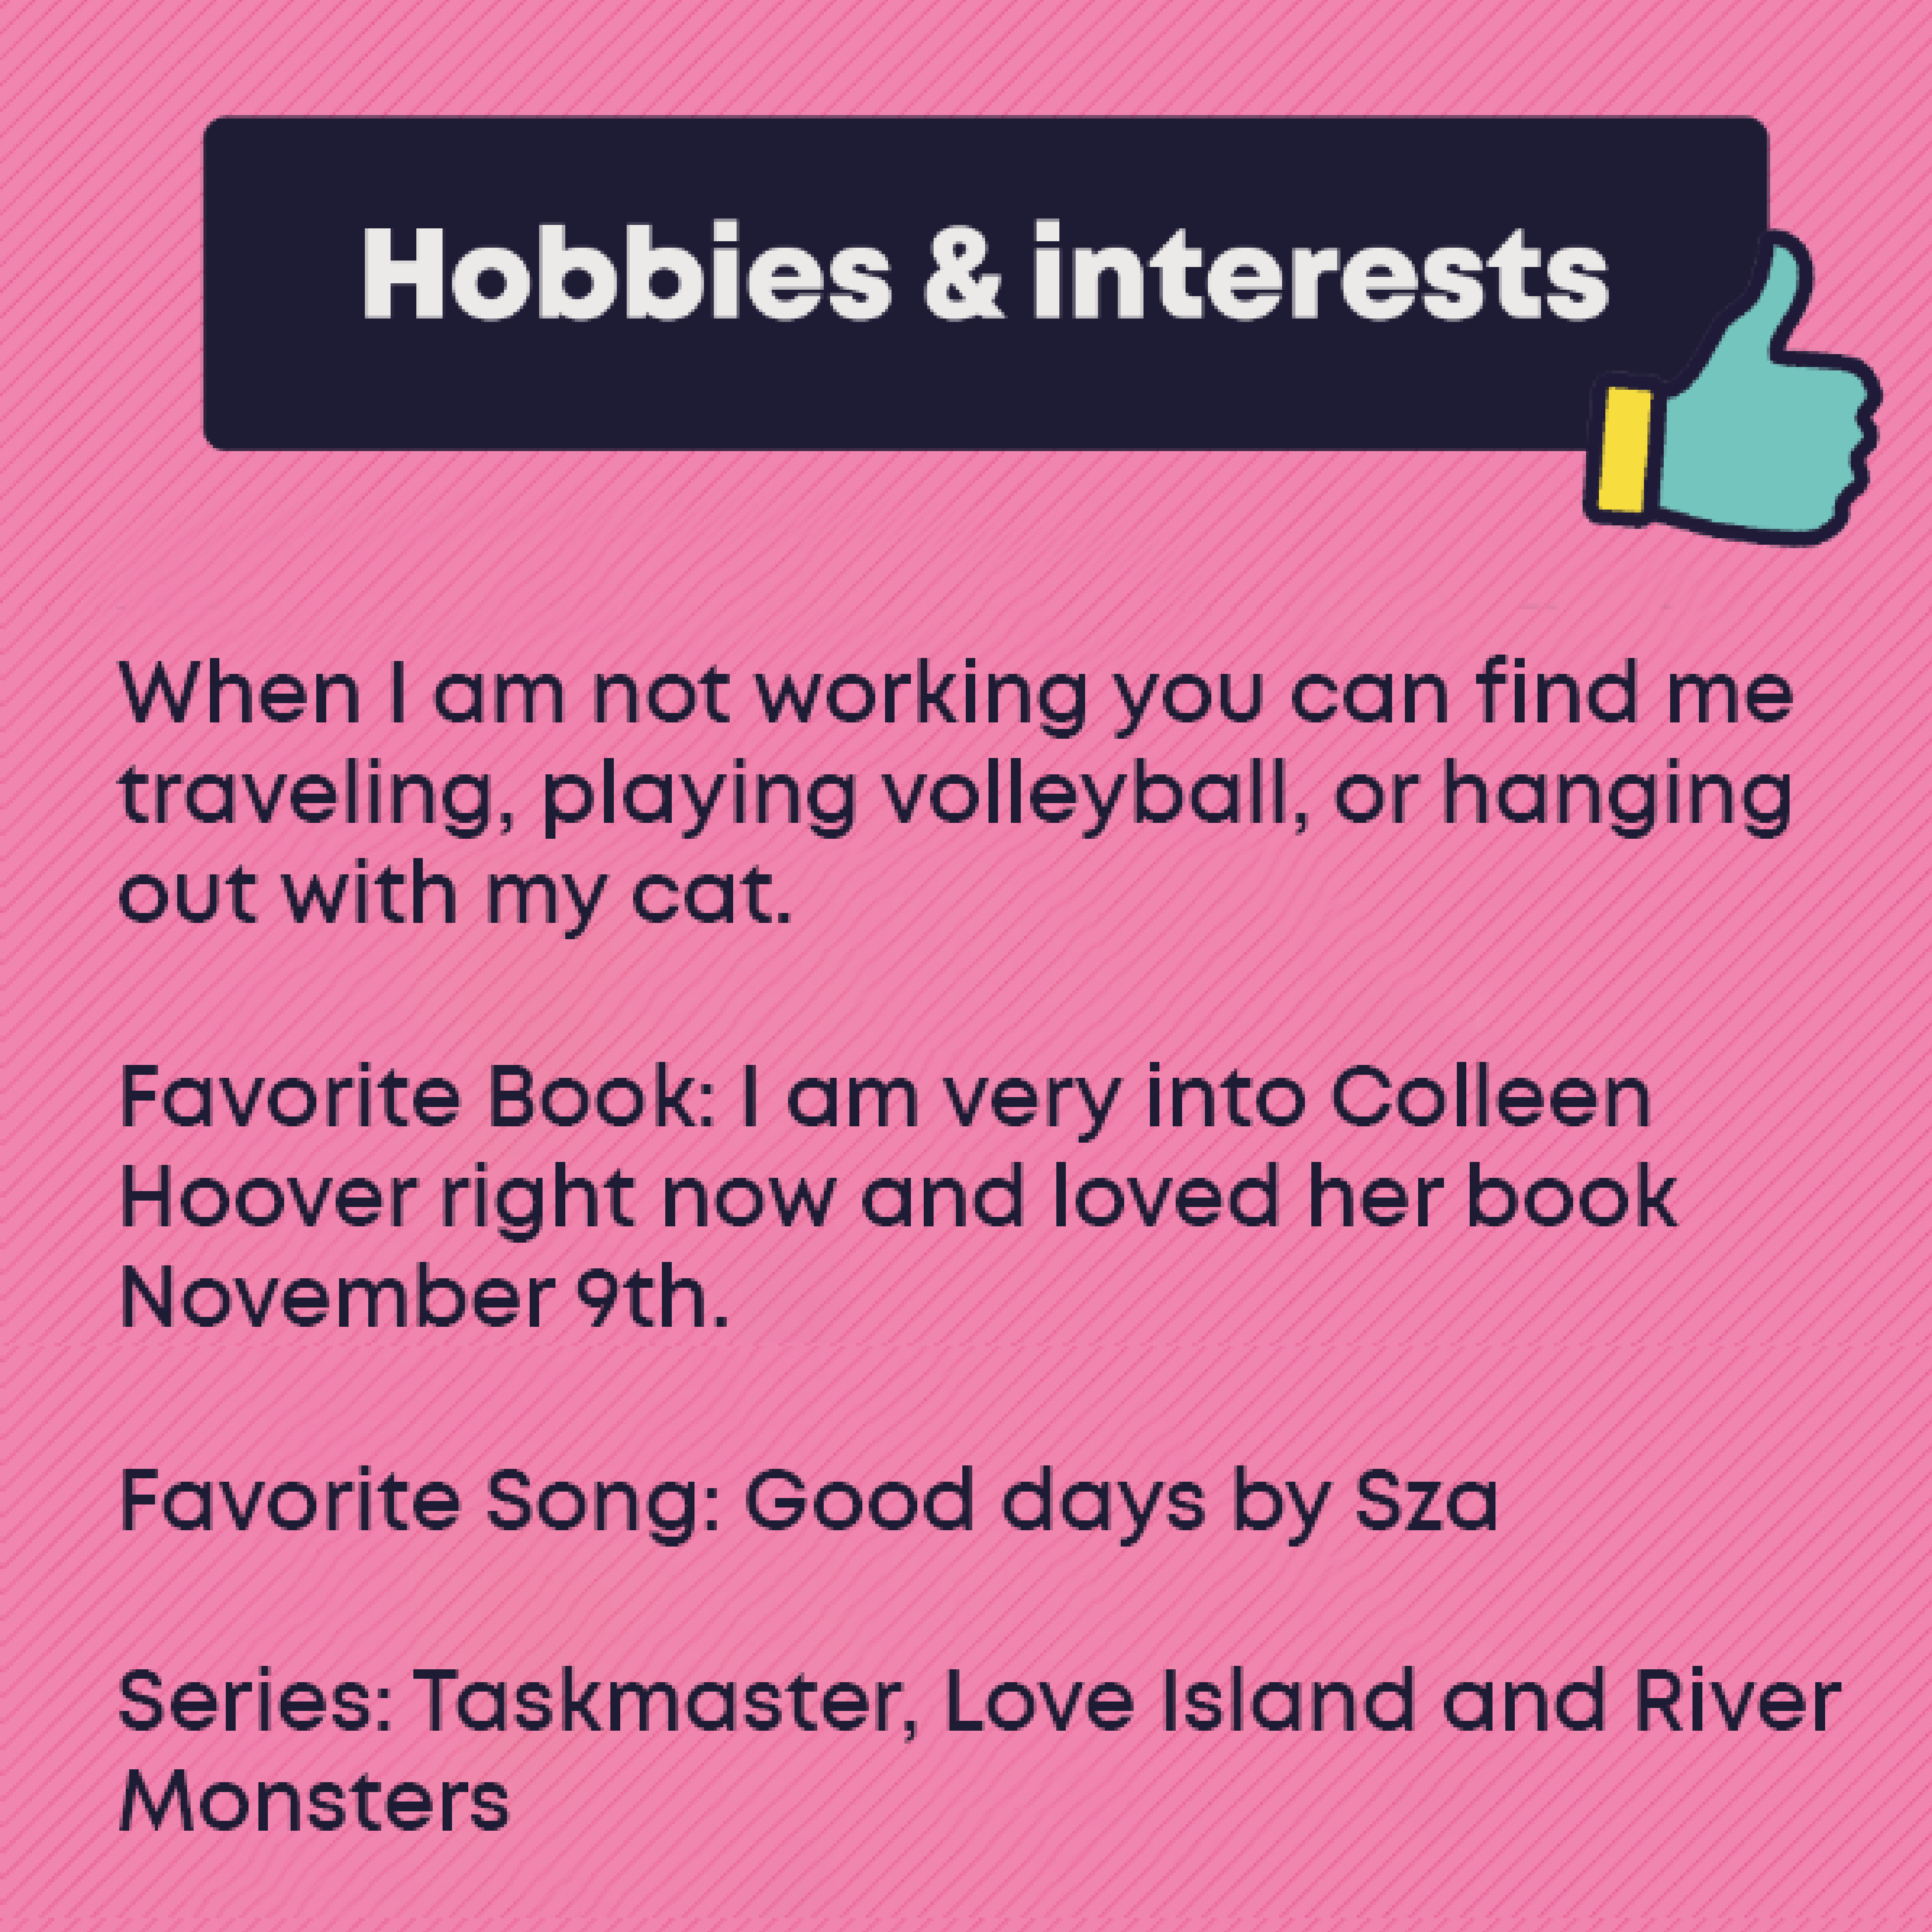 Hobbies and Interests: When I am not working you can find me traveling, playing volleyball, or hanging out with my cat. Favorite Book: I am very into Colleen Hoover right now and loved her book November 9th. Favorite Song: Good days by Sza Series: Taskmaster, Love Island and River Monsters 